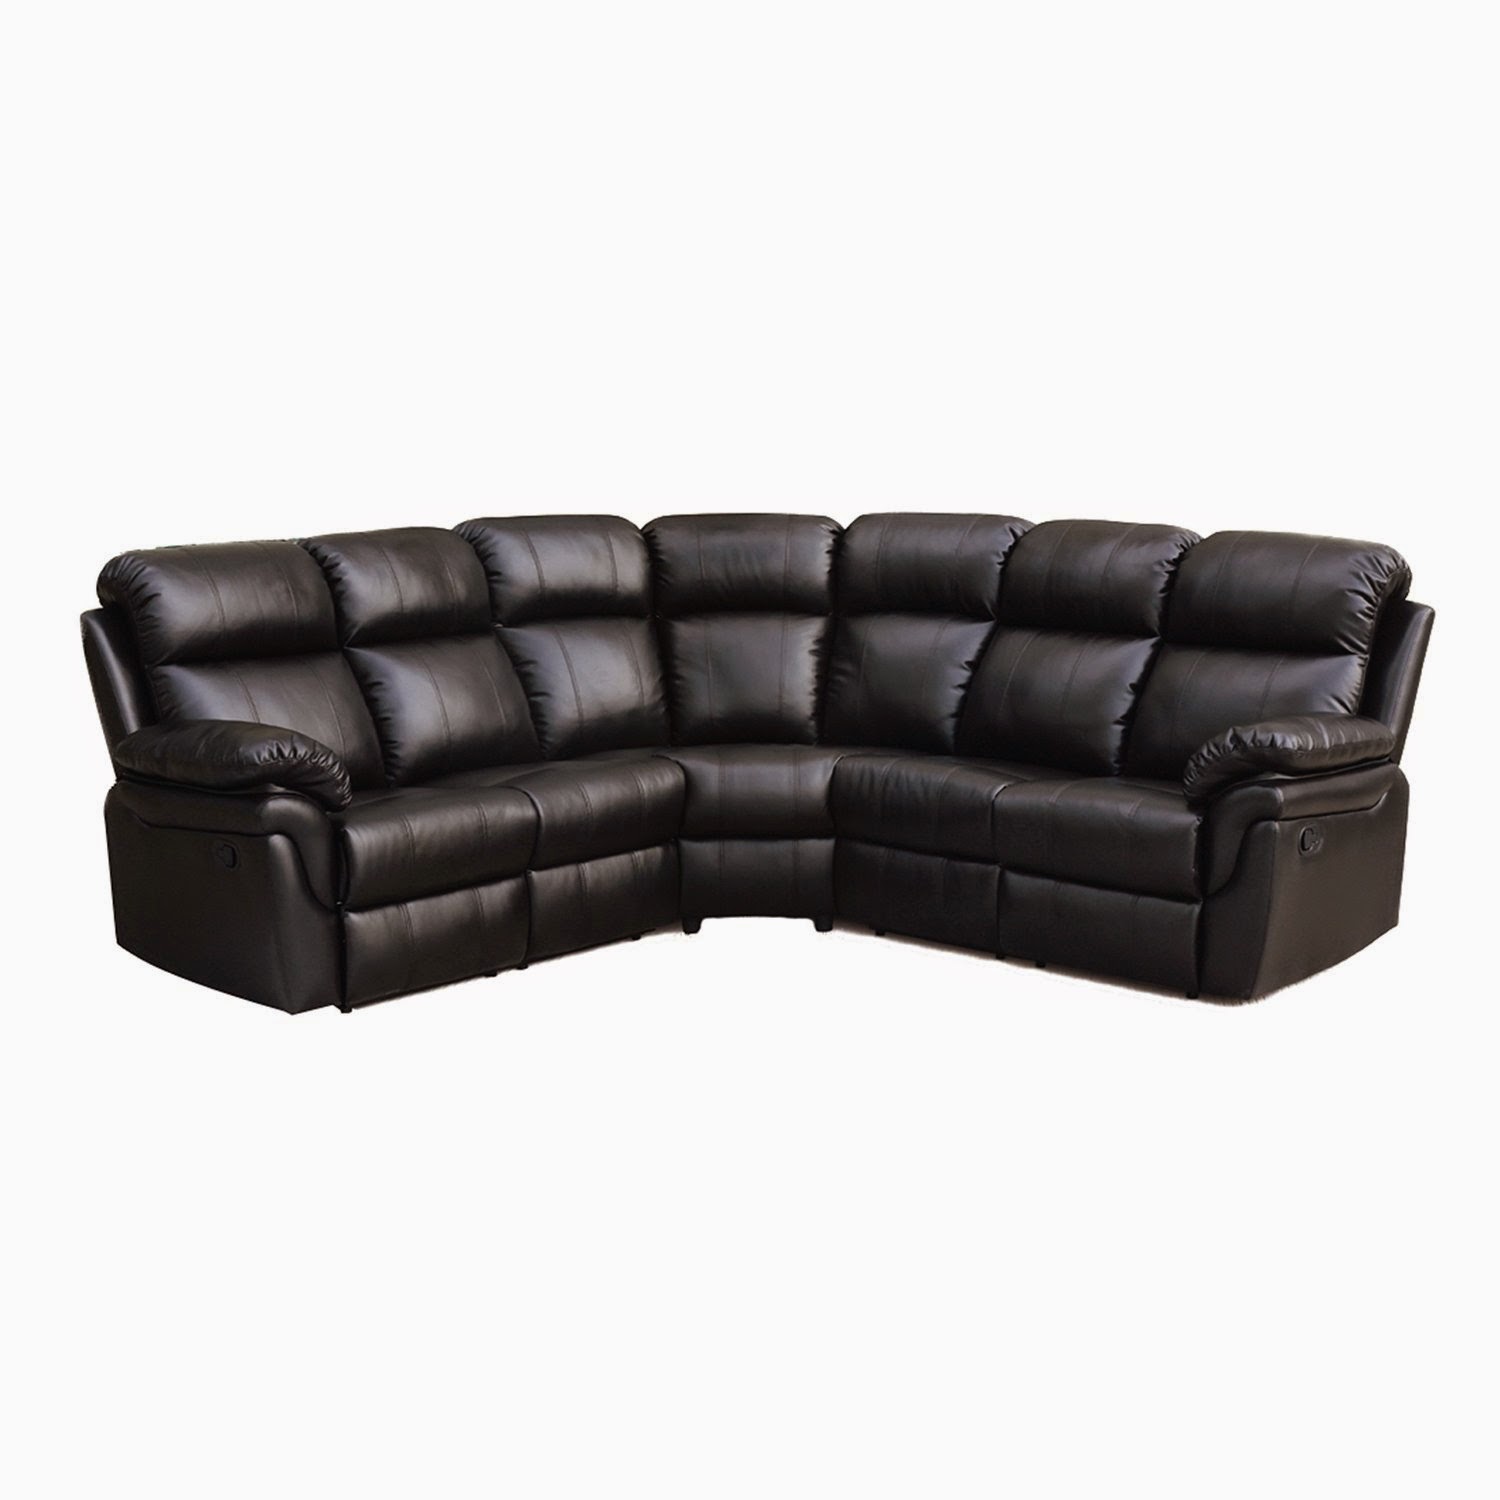 Best Reclining Sofa For The Money March 2015